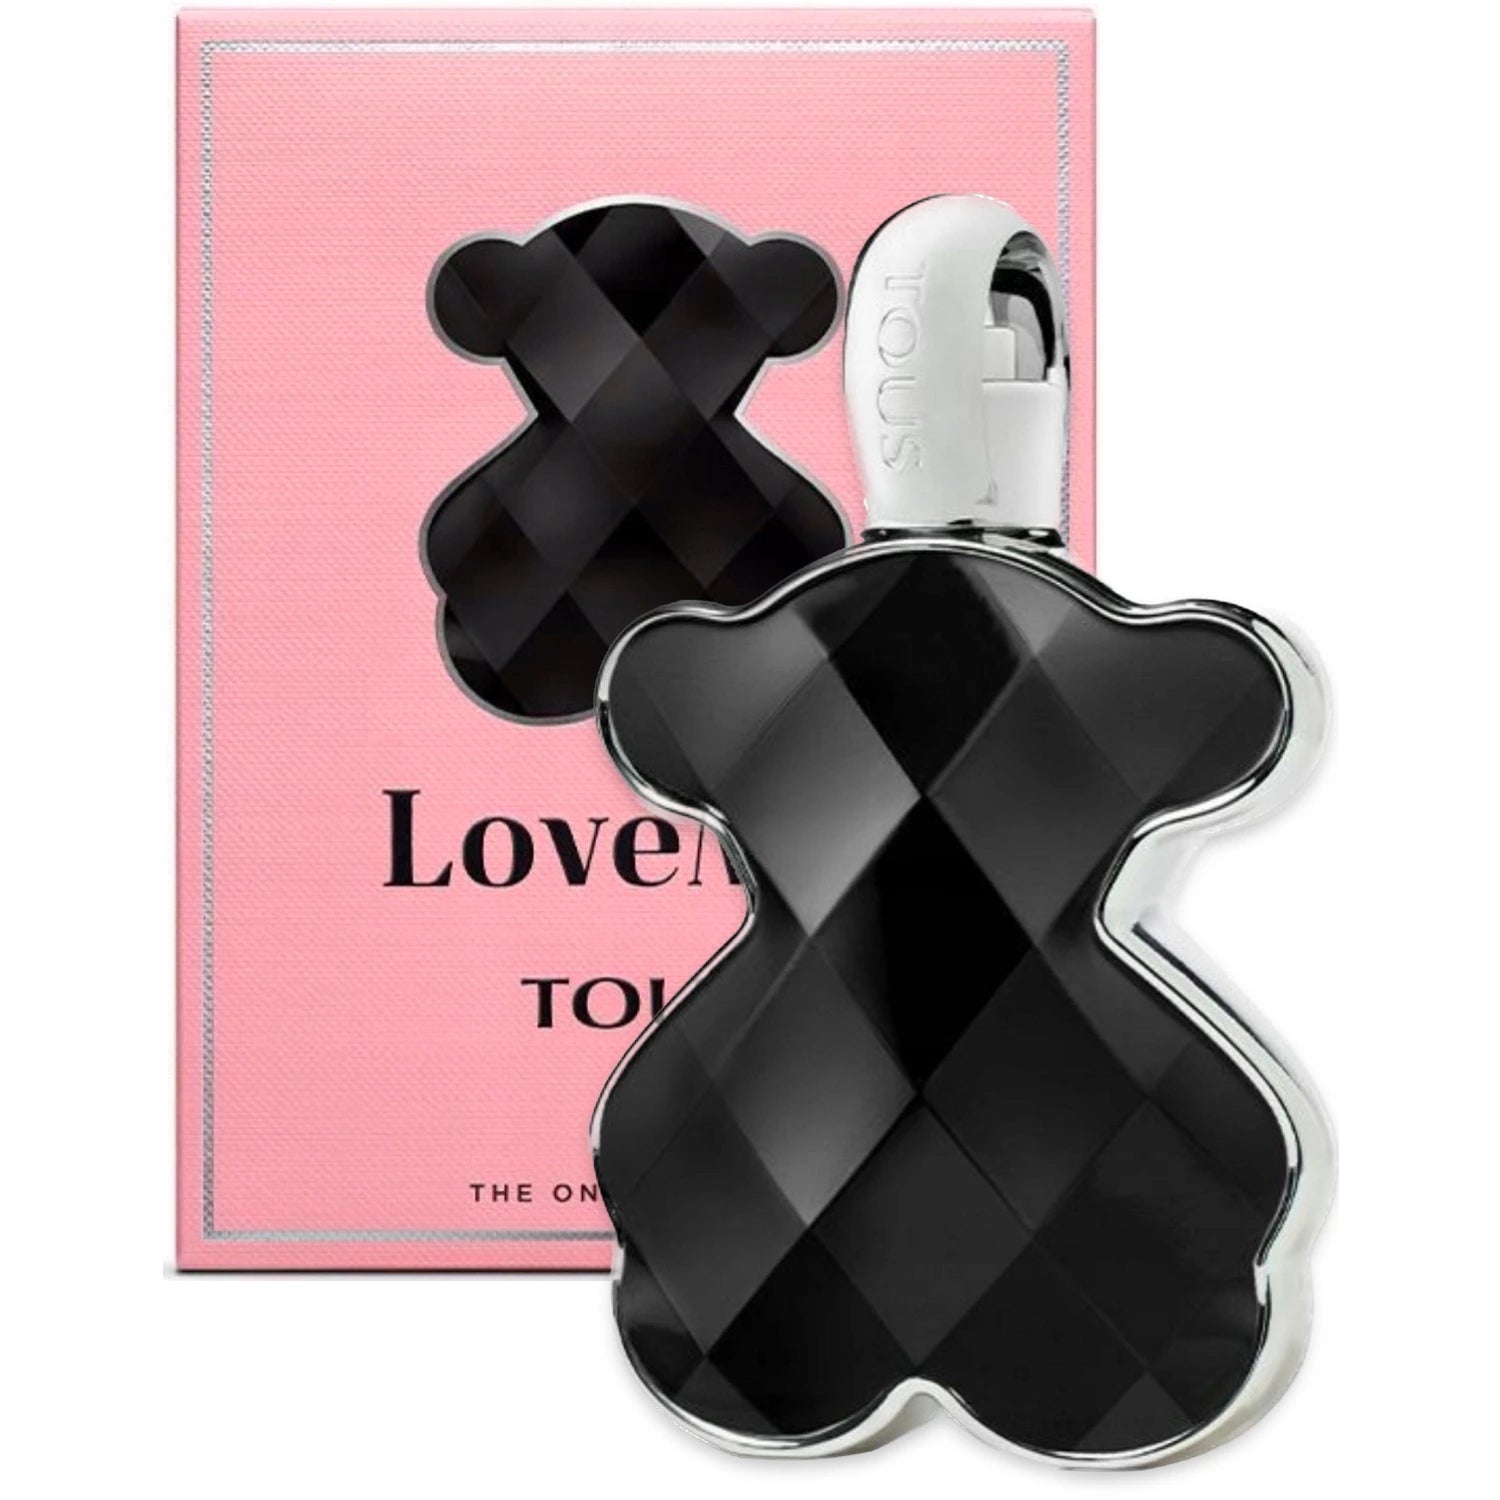 <span data-mce-fragment="1"></span>Indulge in Love Me The Onyx Parfum, an exquisite creation inspired by TOUS's iconic ONYX collection. Every TOUS lover needs this ultimate object of desire, a floral, fruity, and amber scent that is both exquisite and addictive. Its alluring olfactive notes mirror the intensity of the Black Onyx gemstone that inspired it.<span data-mce-fragment="1"></span>